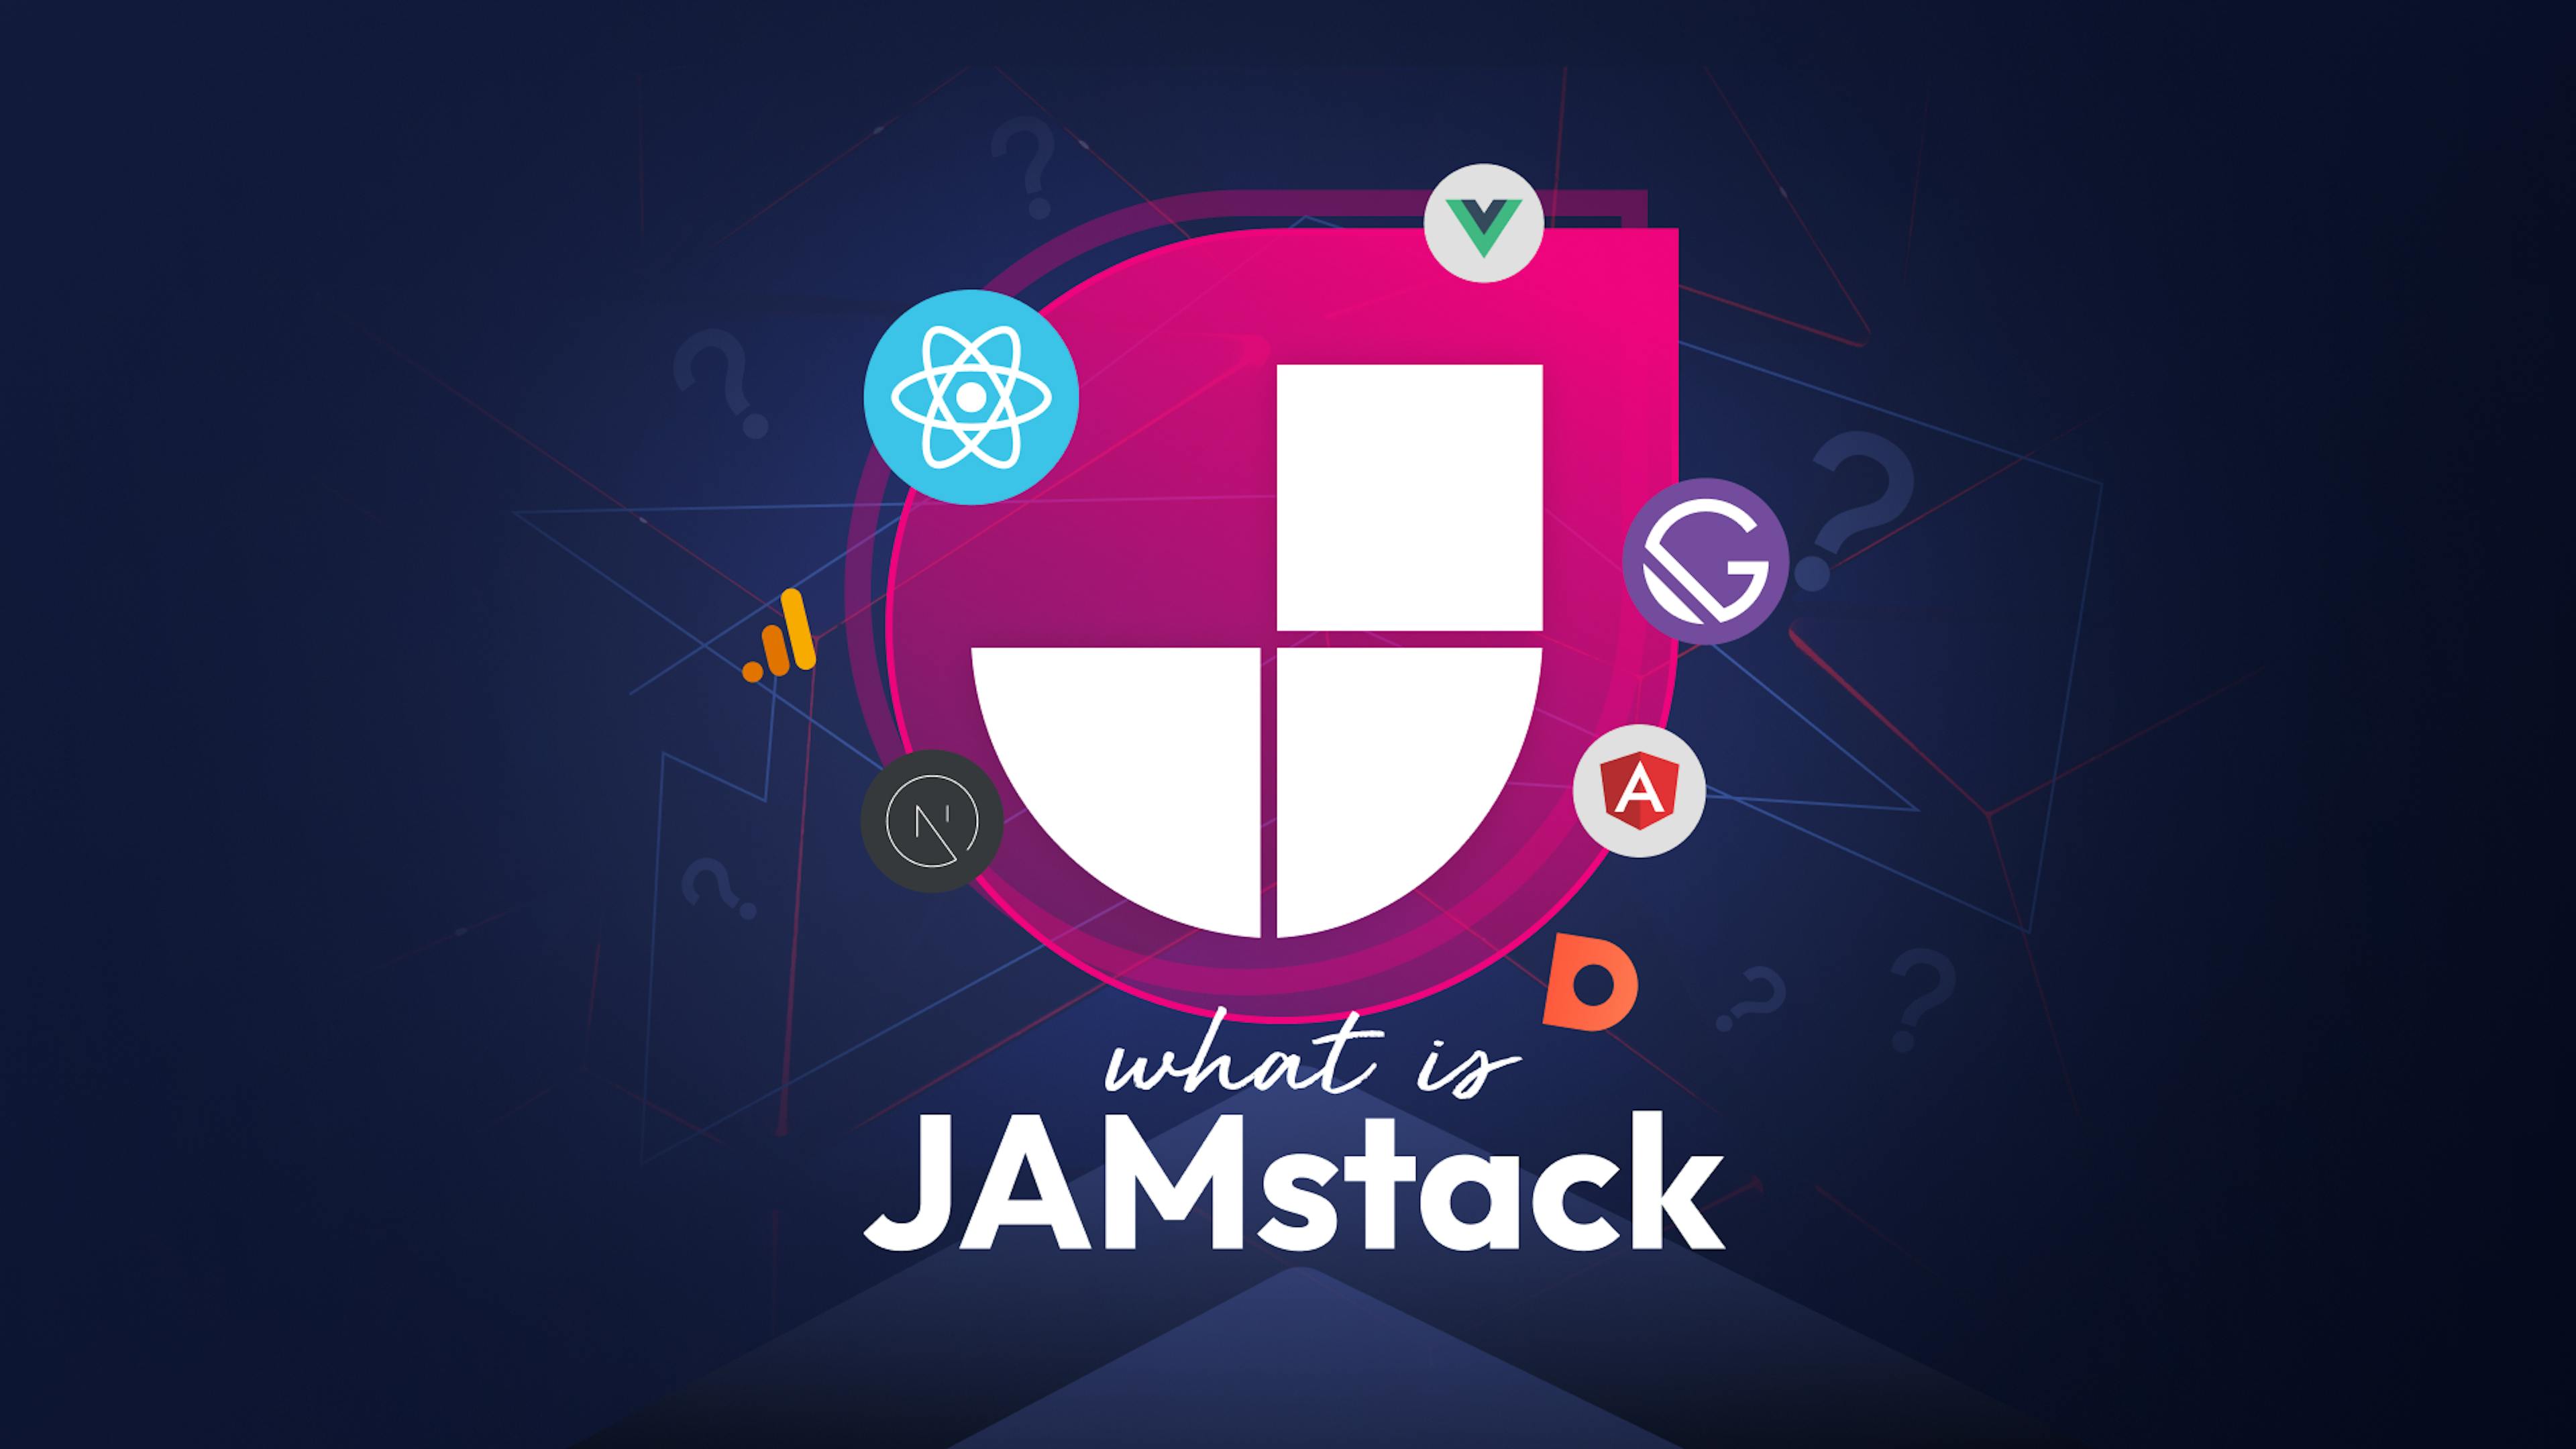 Cover image showing Jamstack